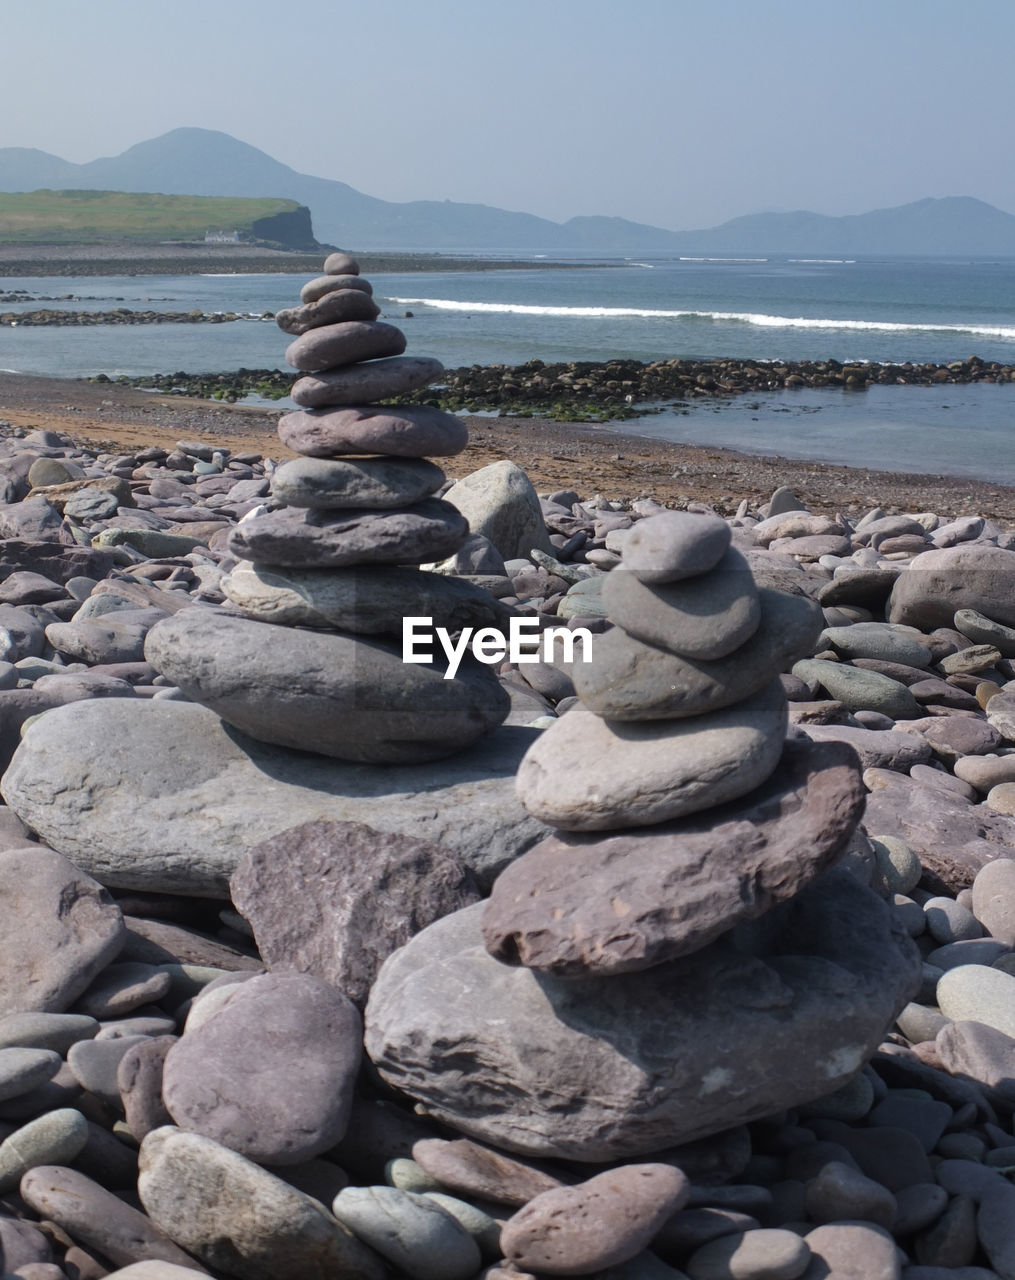 Stacked stones at beach against clear sky during sunny day